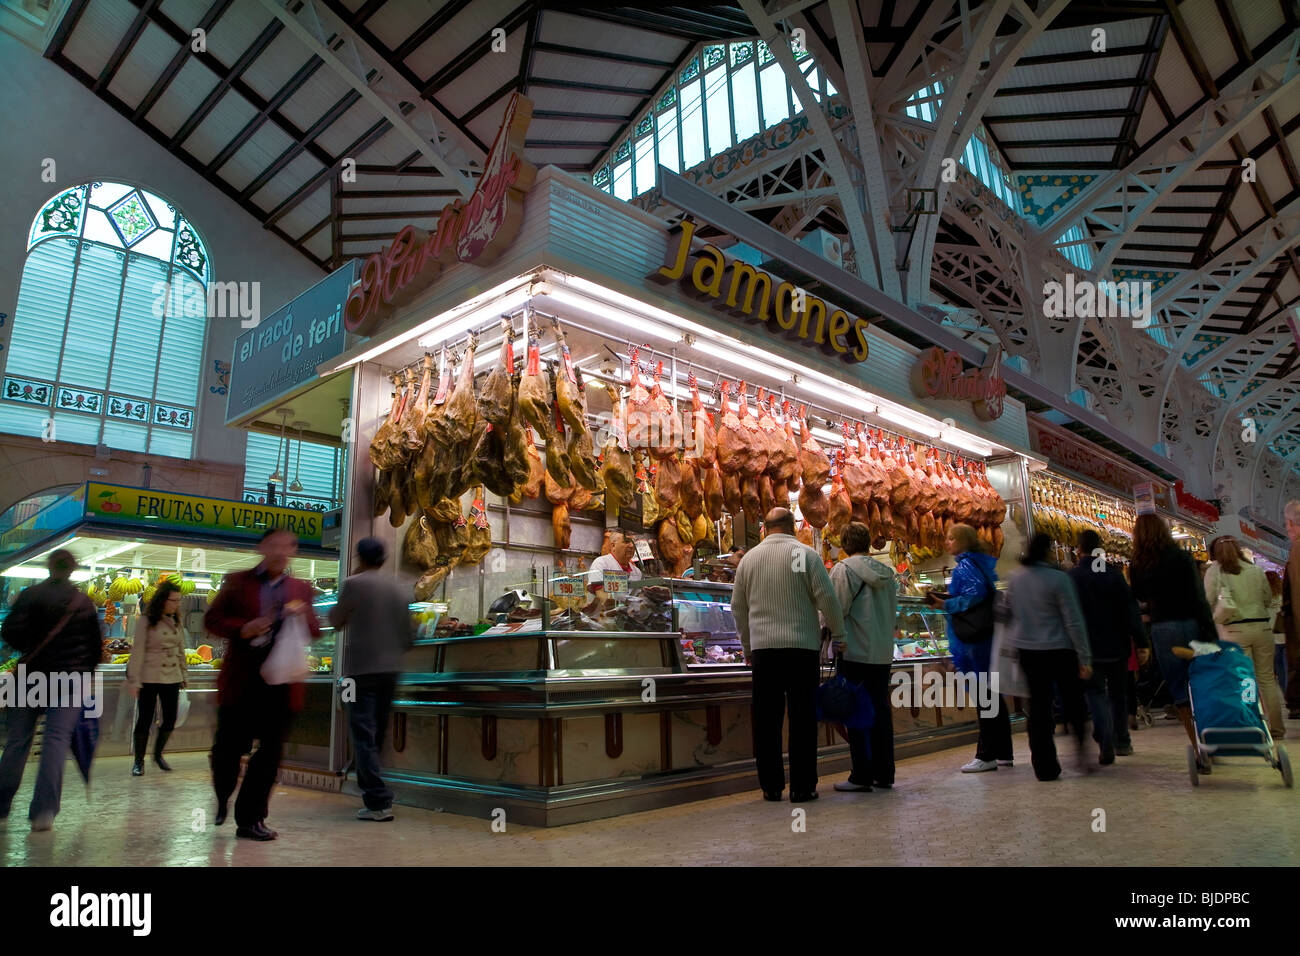 'Mercado Central (central market) in Valencia, Spain, one of the largest indoor markets in Europe', stall selling cured ham Stock Photo